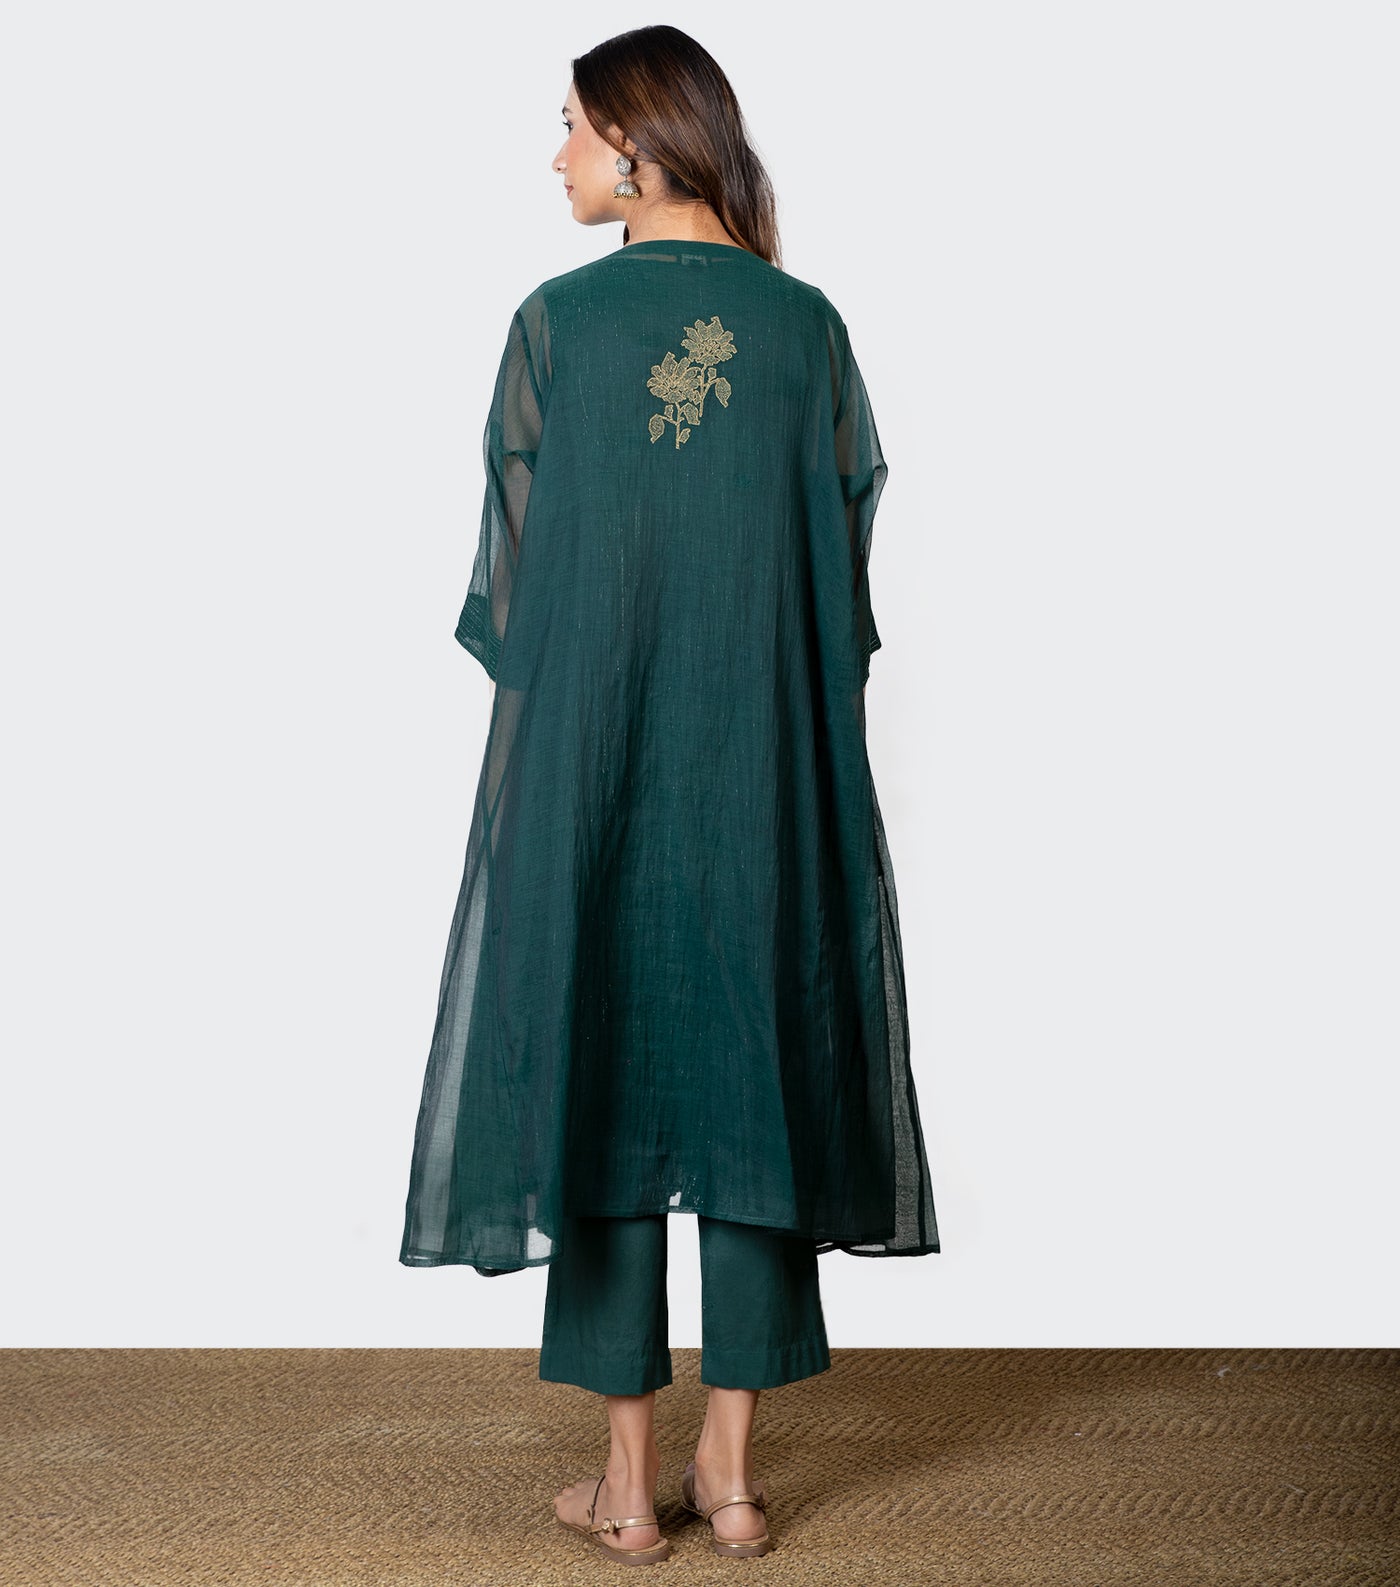 emerald Green Embroidered Chanderi Cape & Pants Set